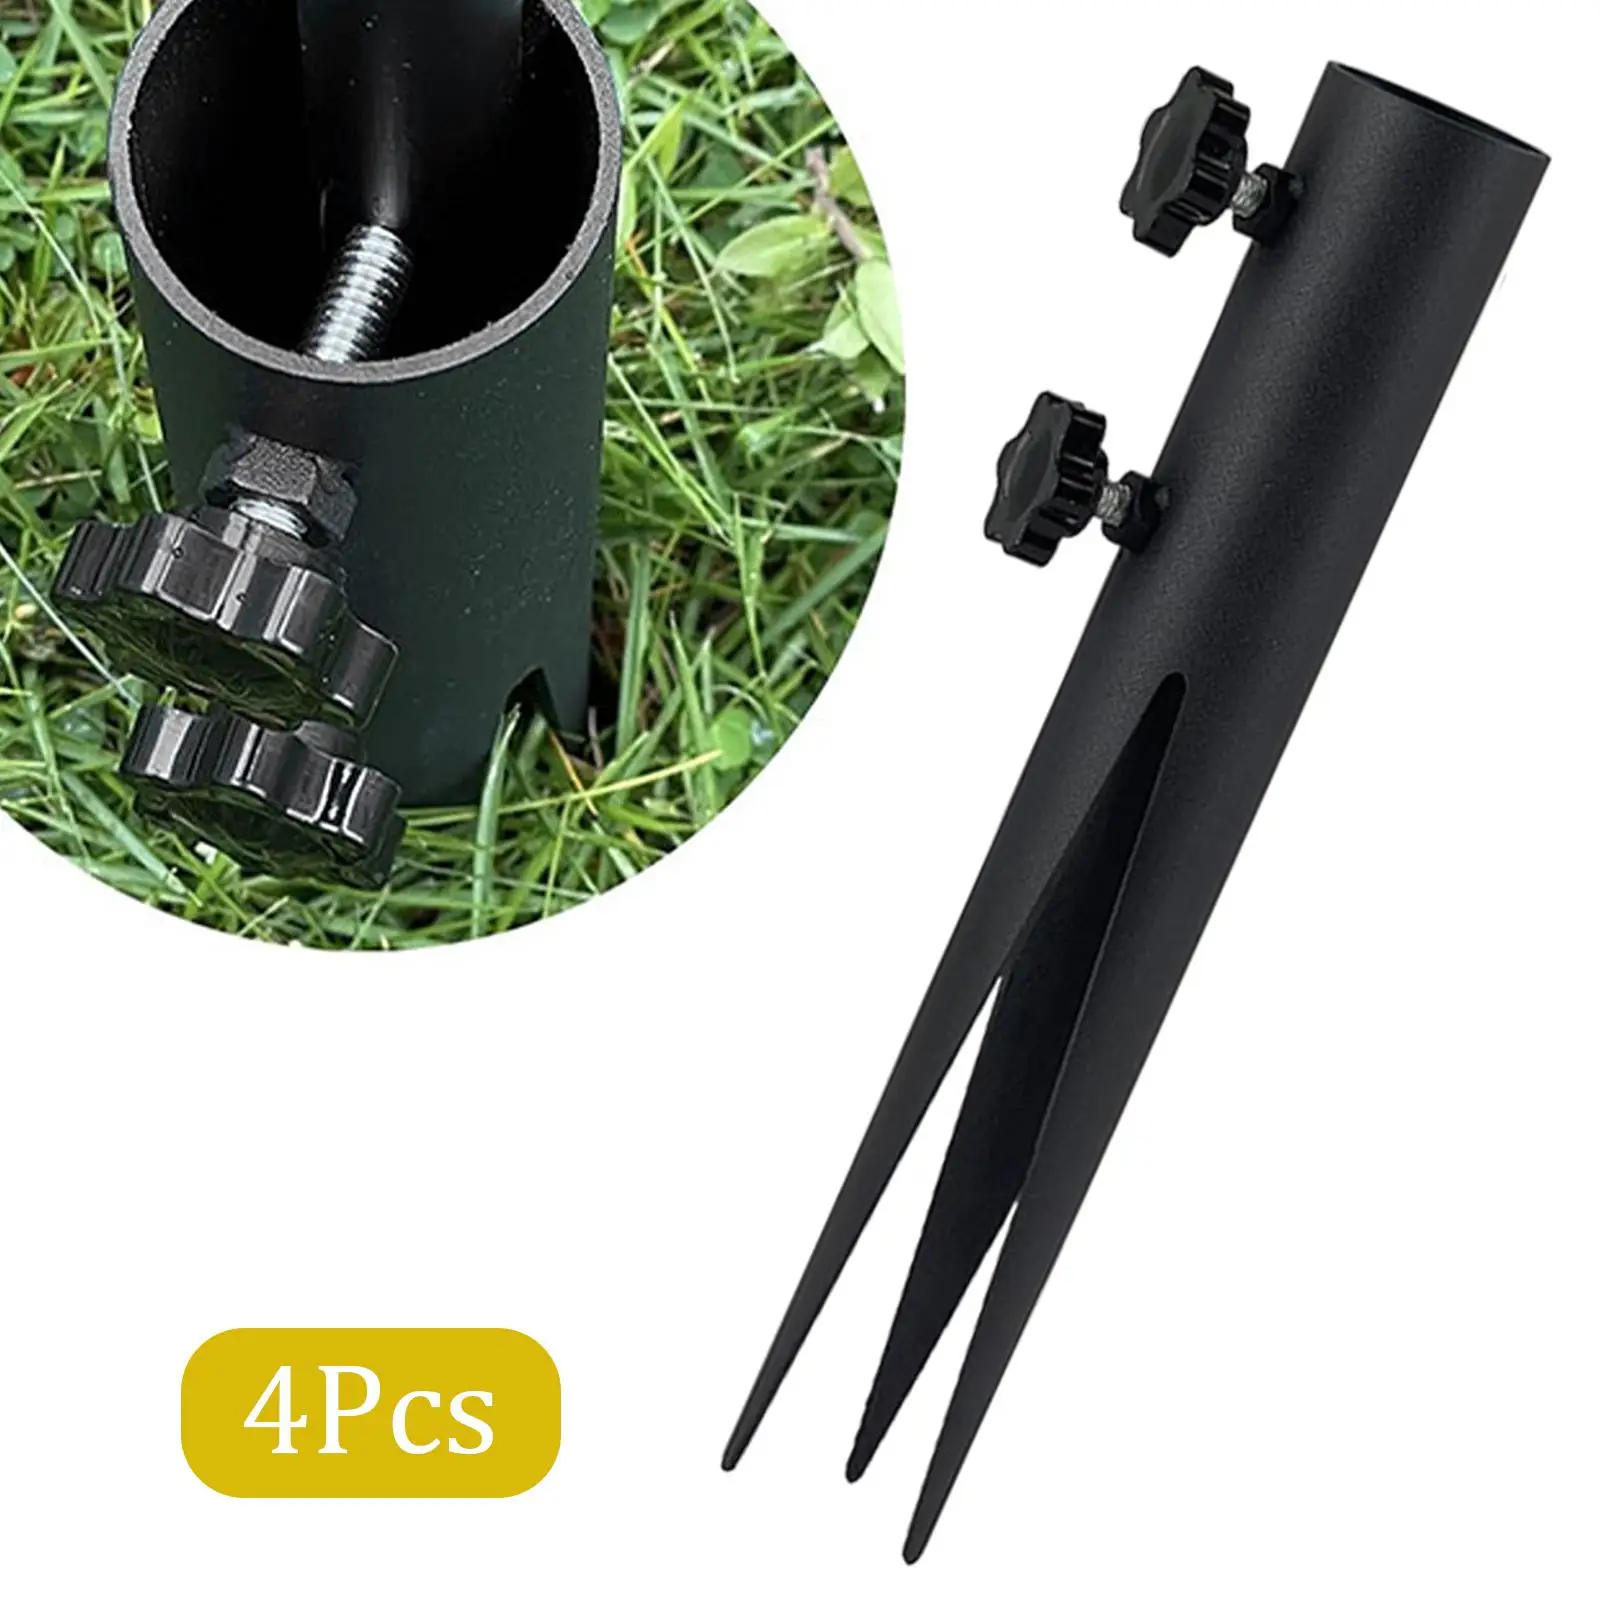 

4Pcs Torch Stakes Lawn Yard Flag Pole Ground Mount Ground Torch Holders Universal Light Stakes Garden Stakes for Outdoor Lights